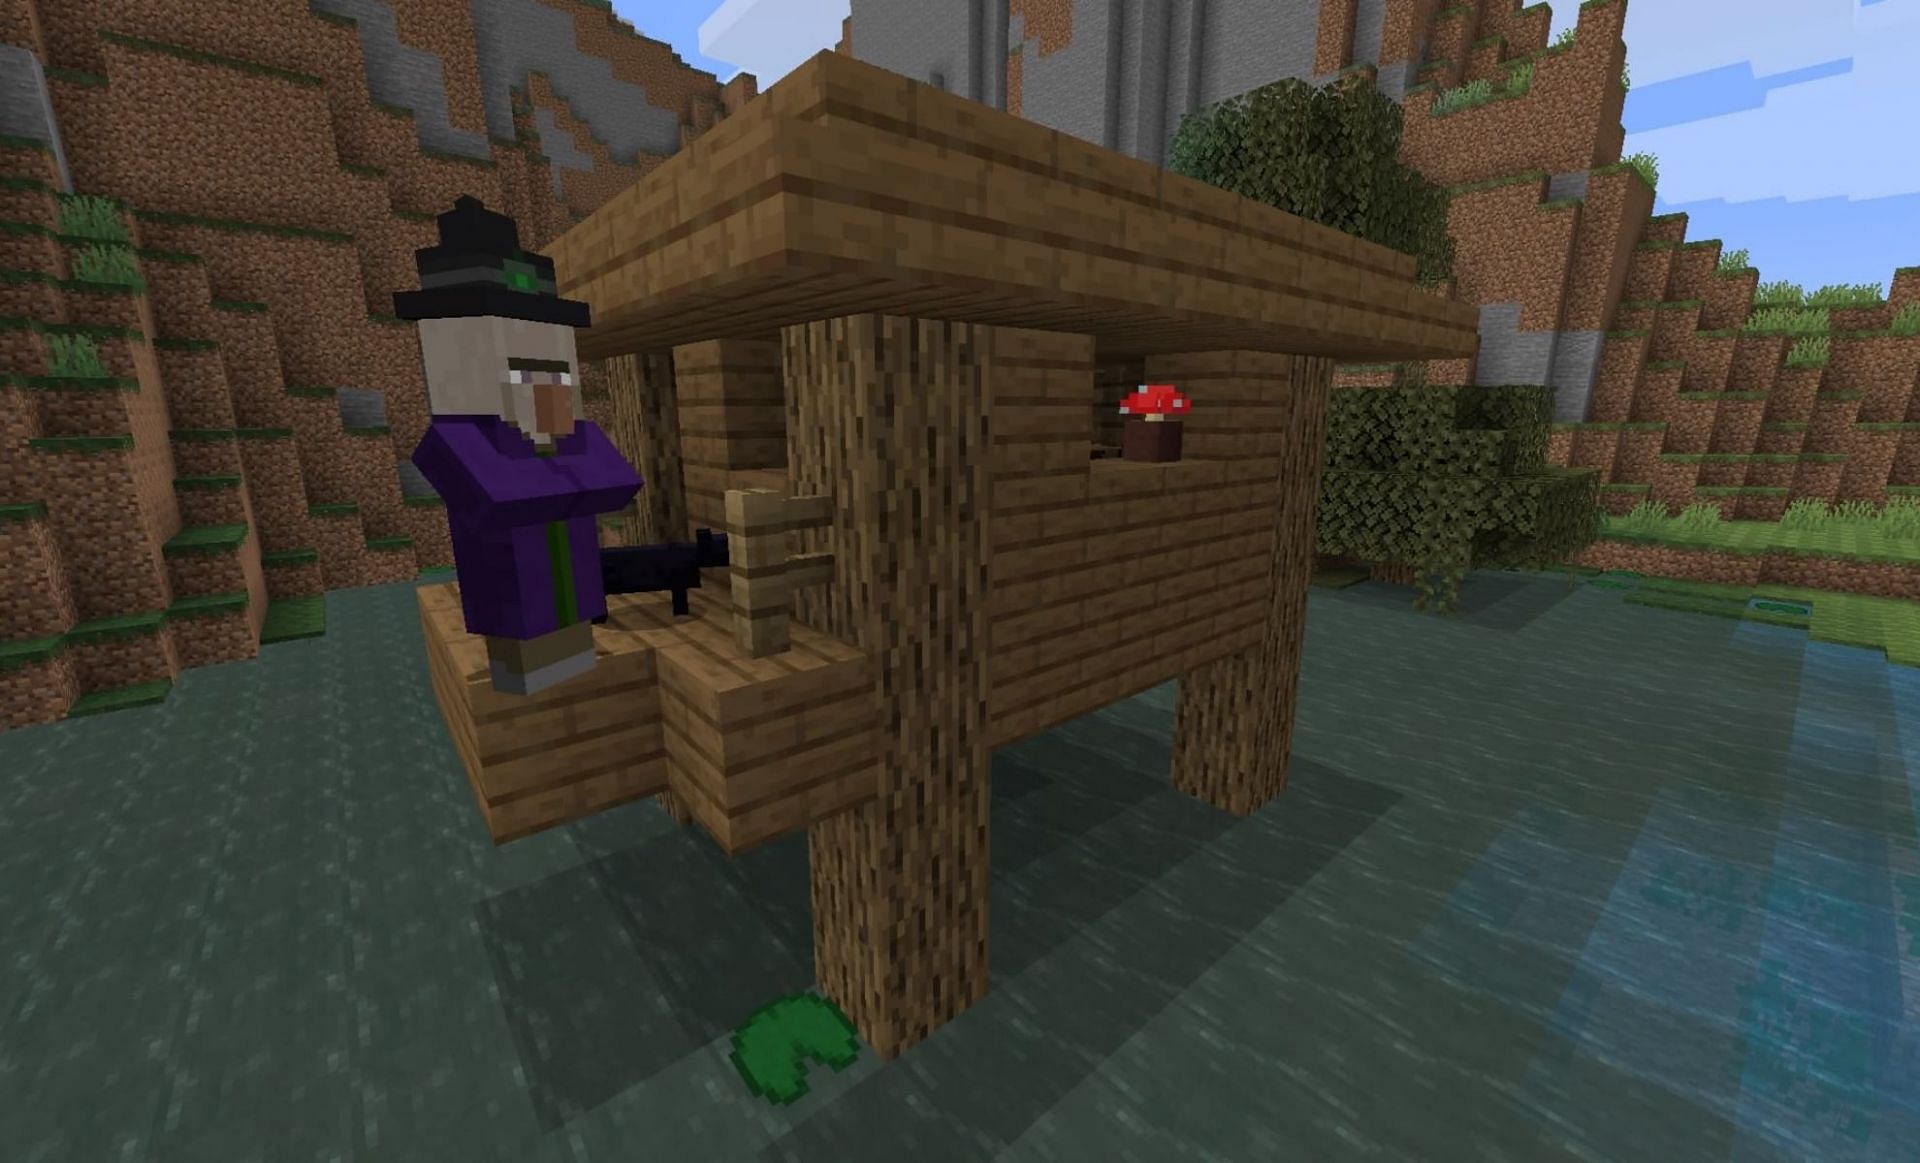 Witch hut with witch and cat (Image via Mojang)